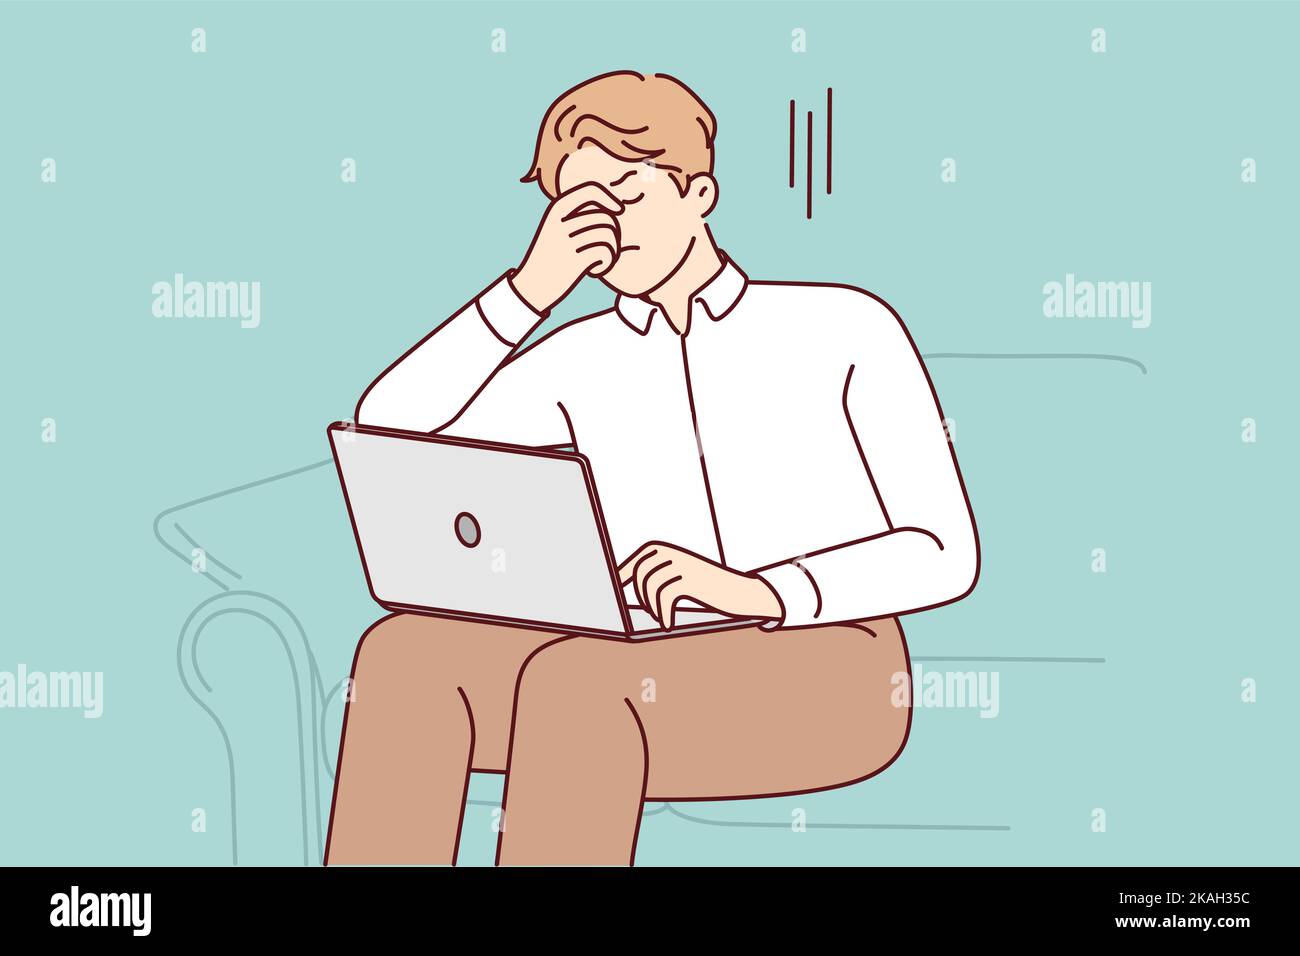 Unhealthy man sit on sofa work on computer suffer from headache. Unwell tired male with laptop struggle with overwork or health problems. Vector illustration.  Stock Vector